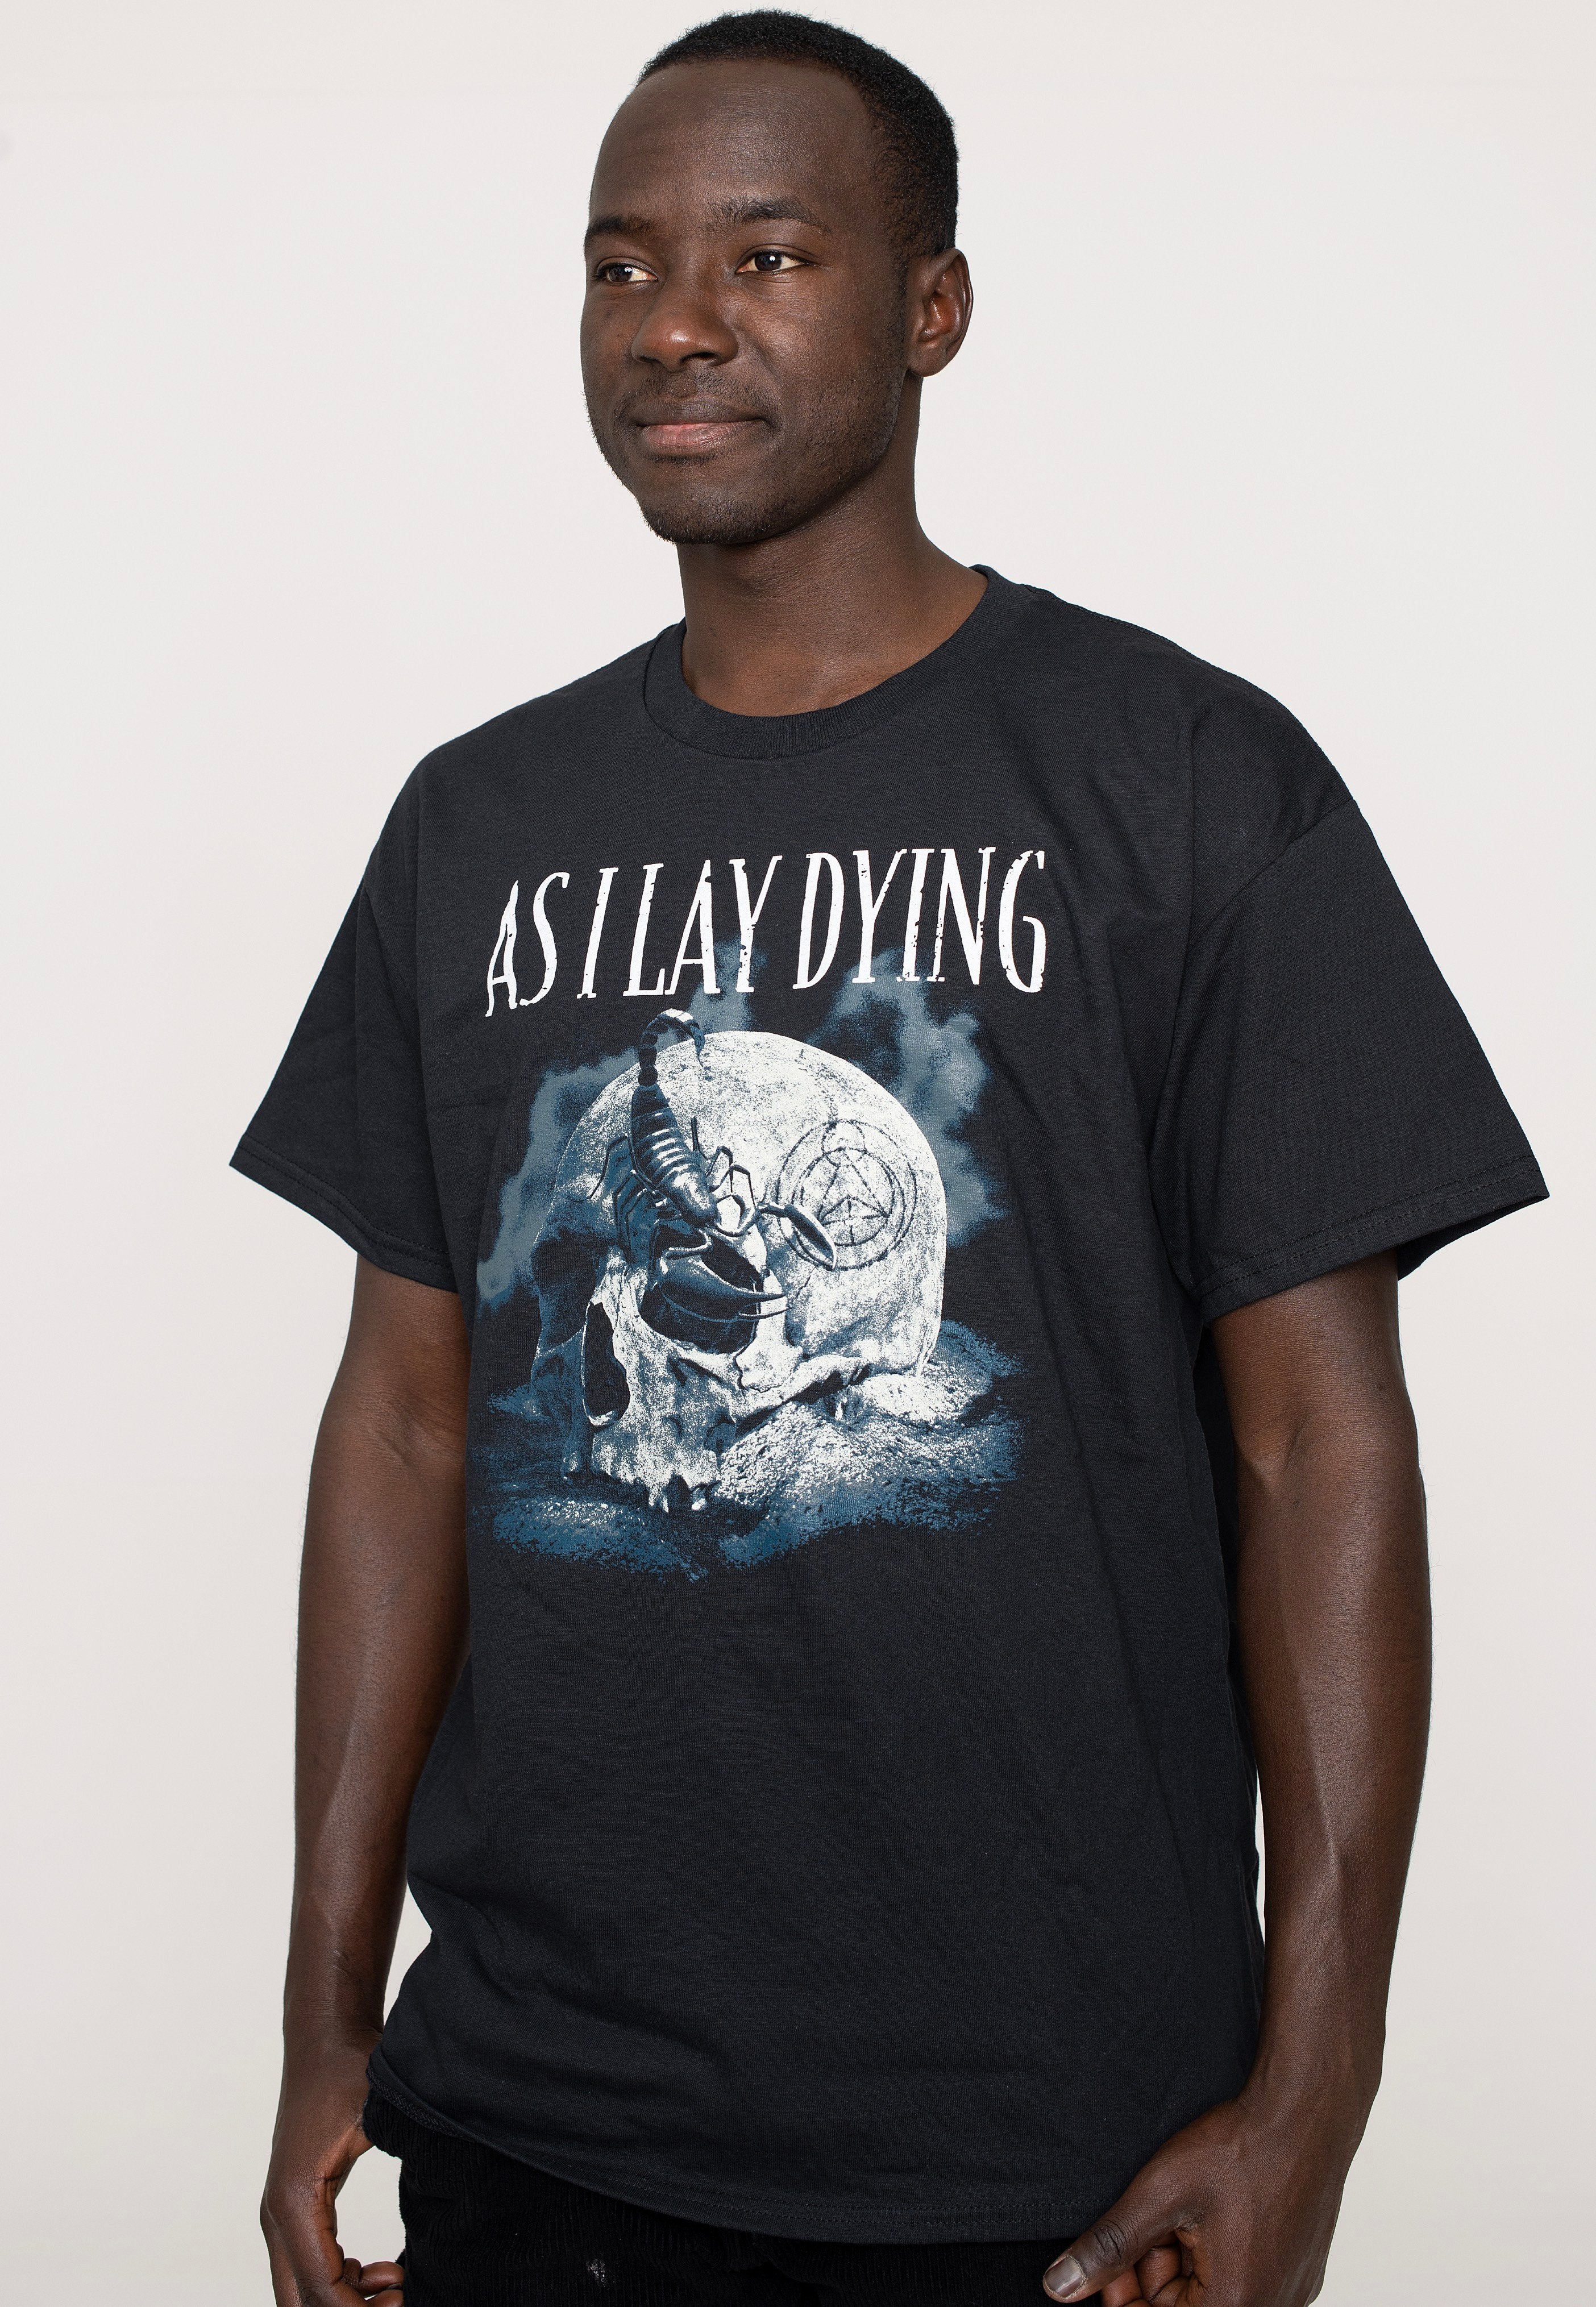 As I Lay Dying - Scorpion - T-Shirt